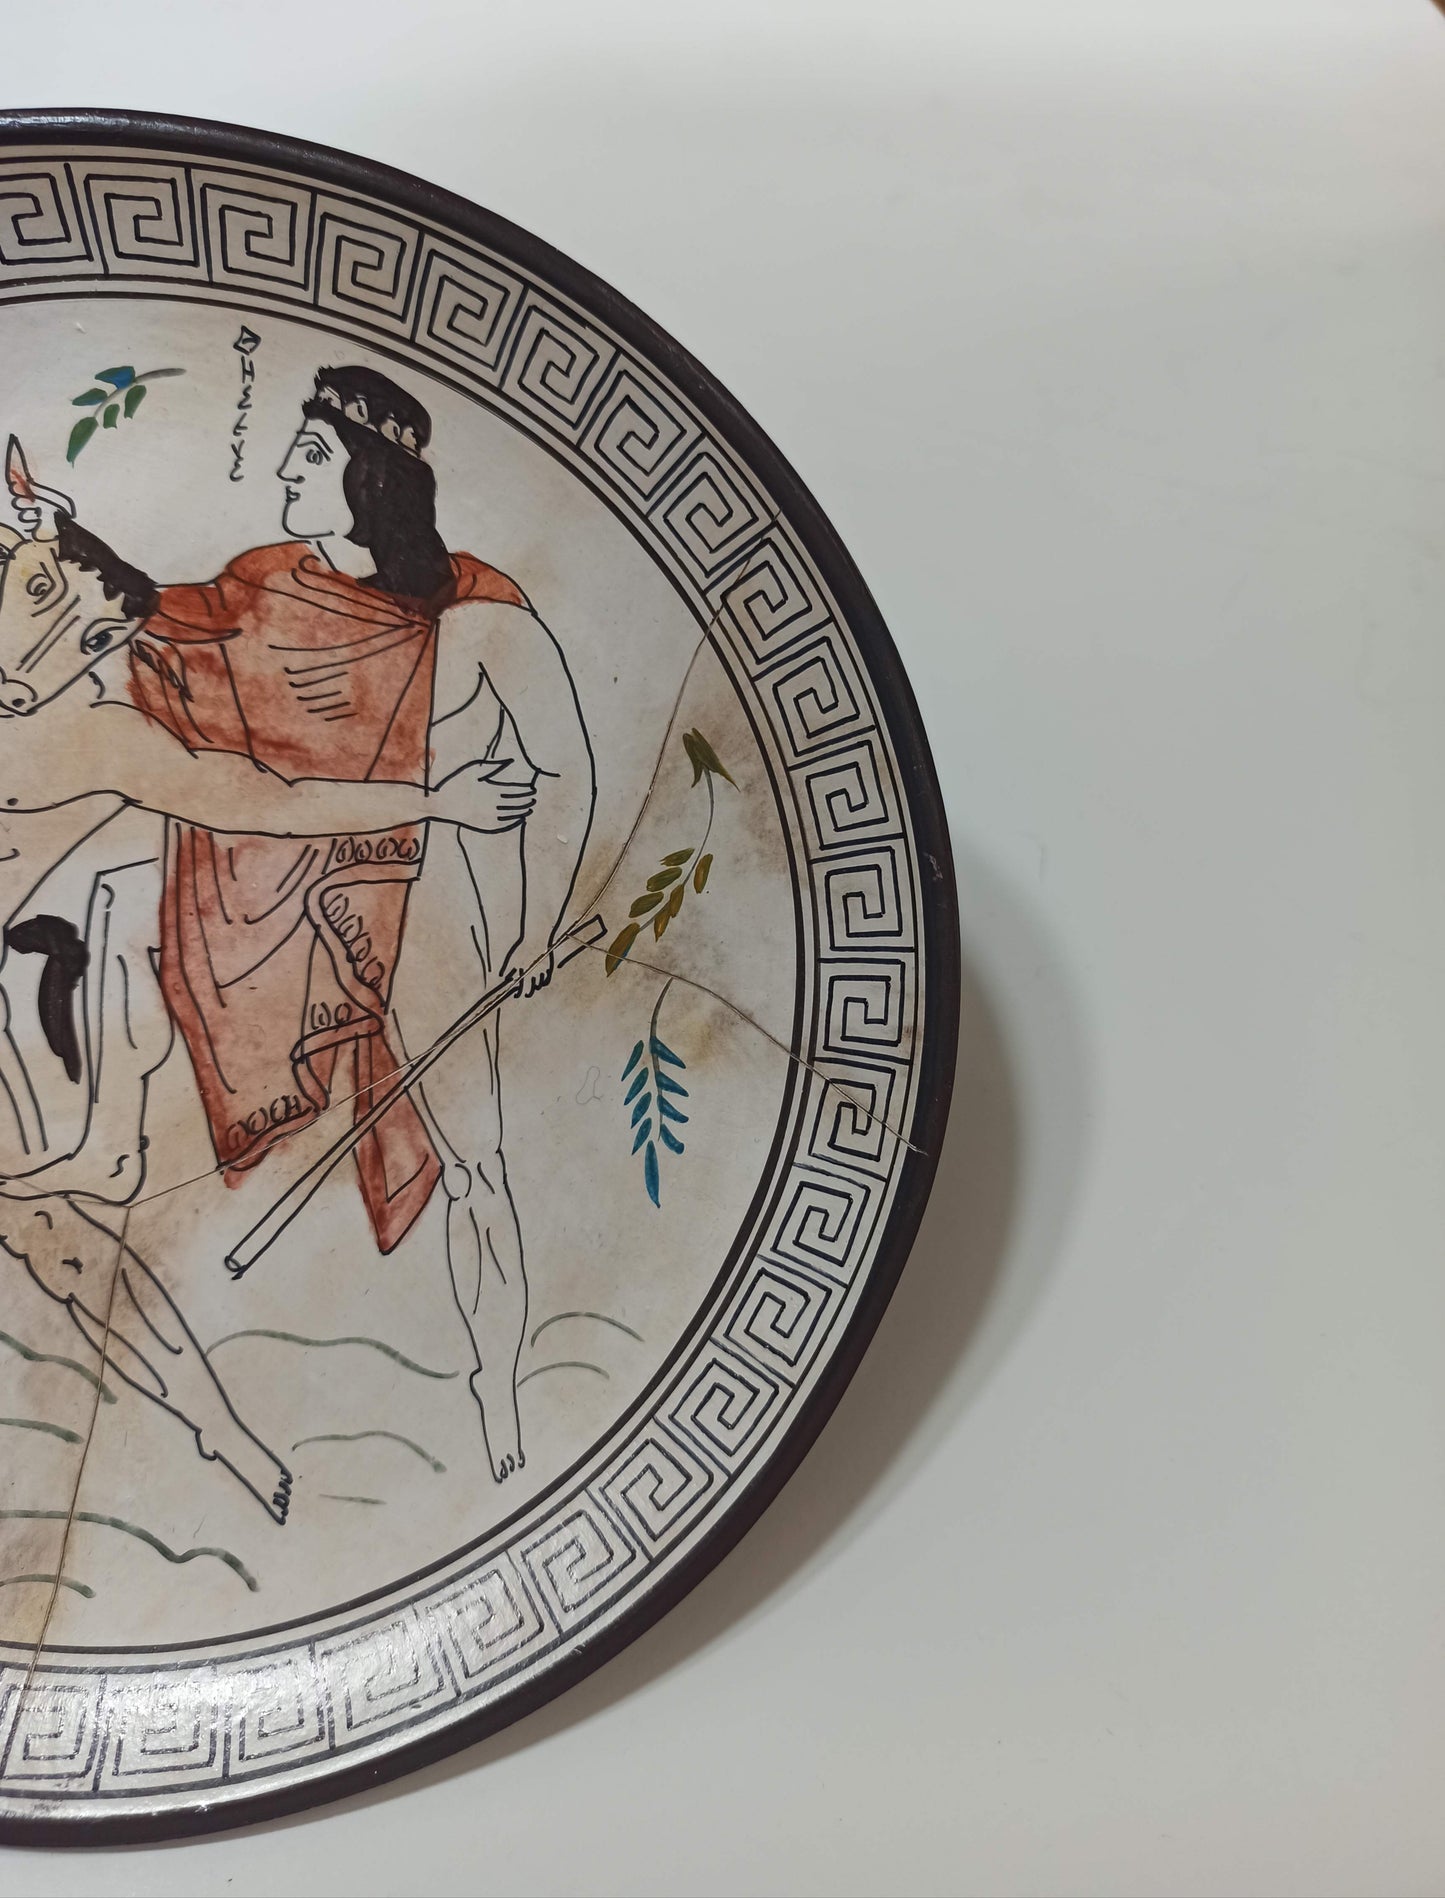 Theseus and the Minotaur - Fight in the Labyrinth of Crete - Hero against Beast- Crackle Look - Ceramic plate - Handmade